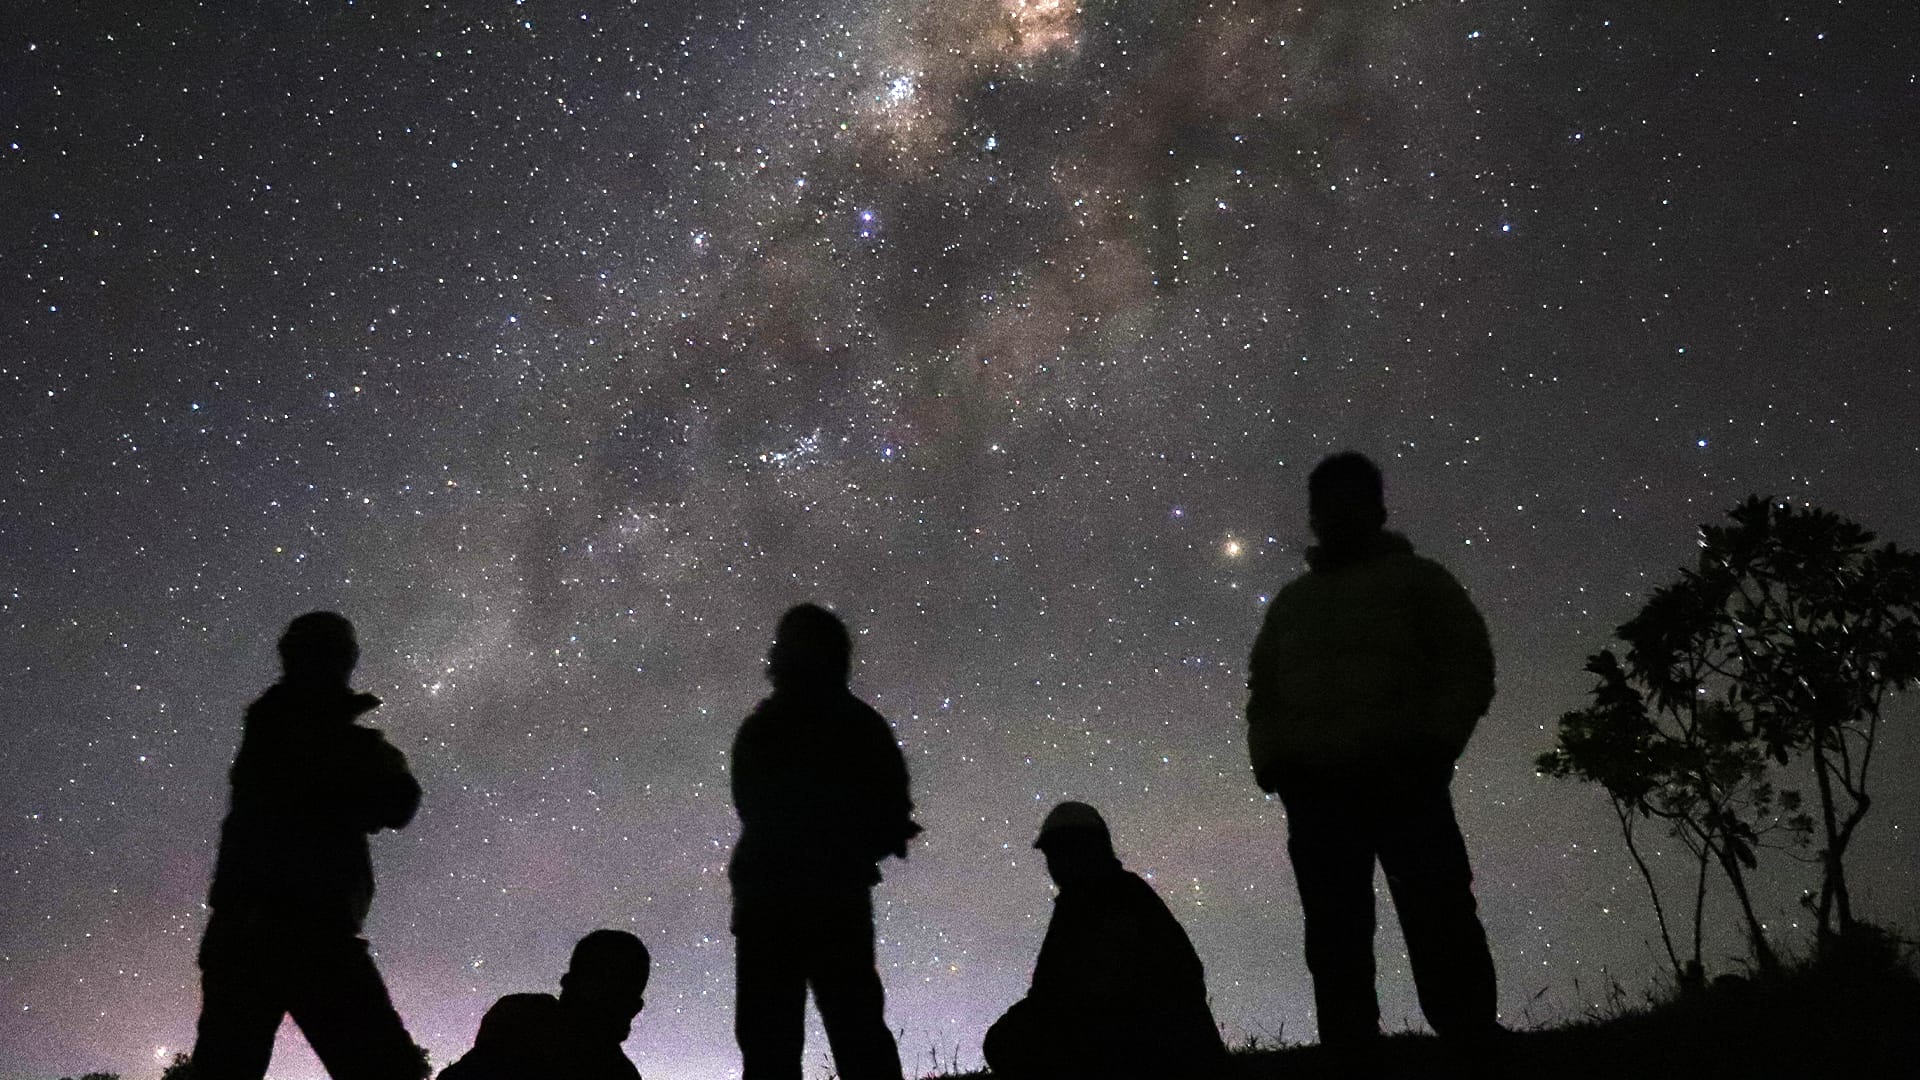 Stargazing without a telescope